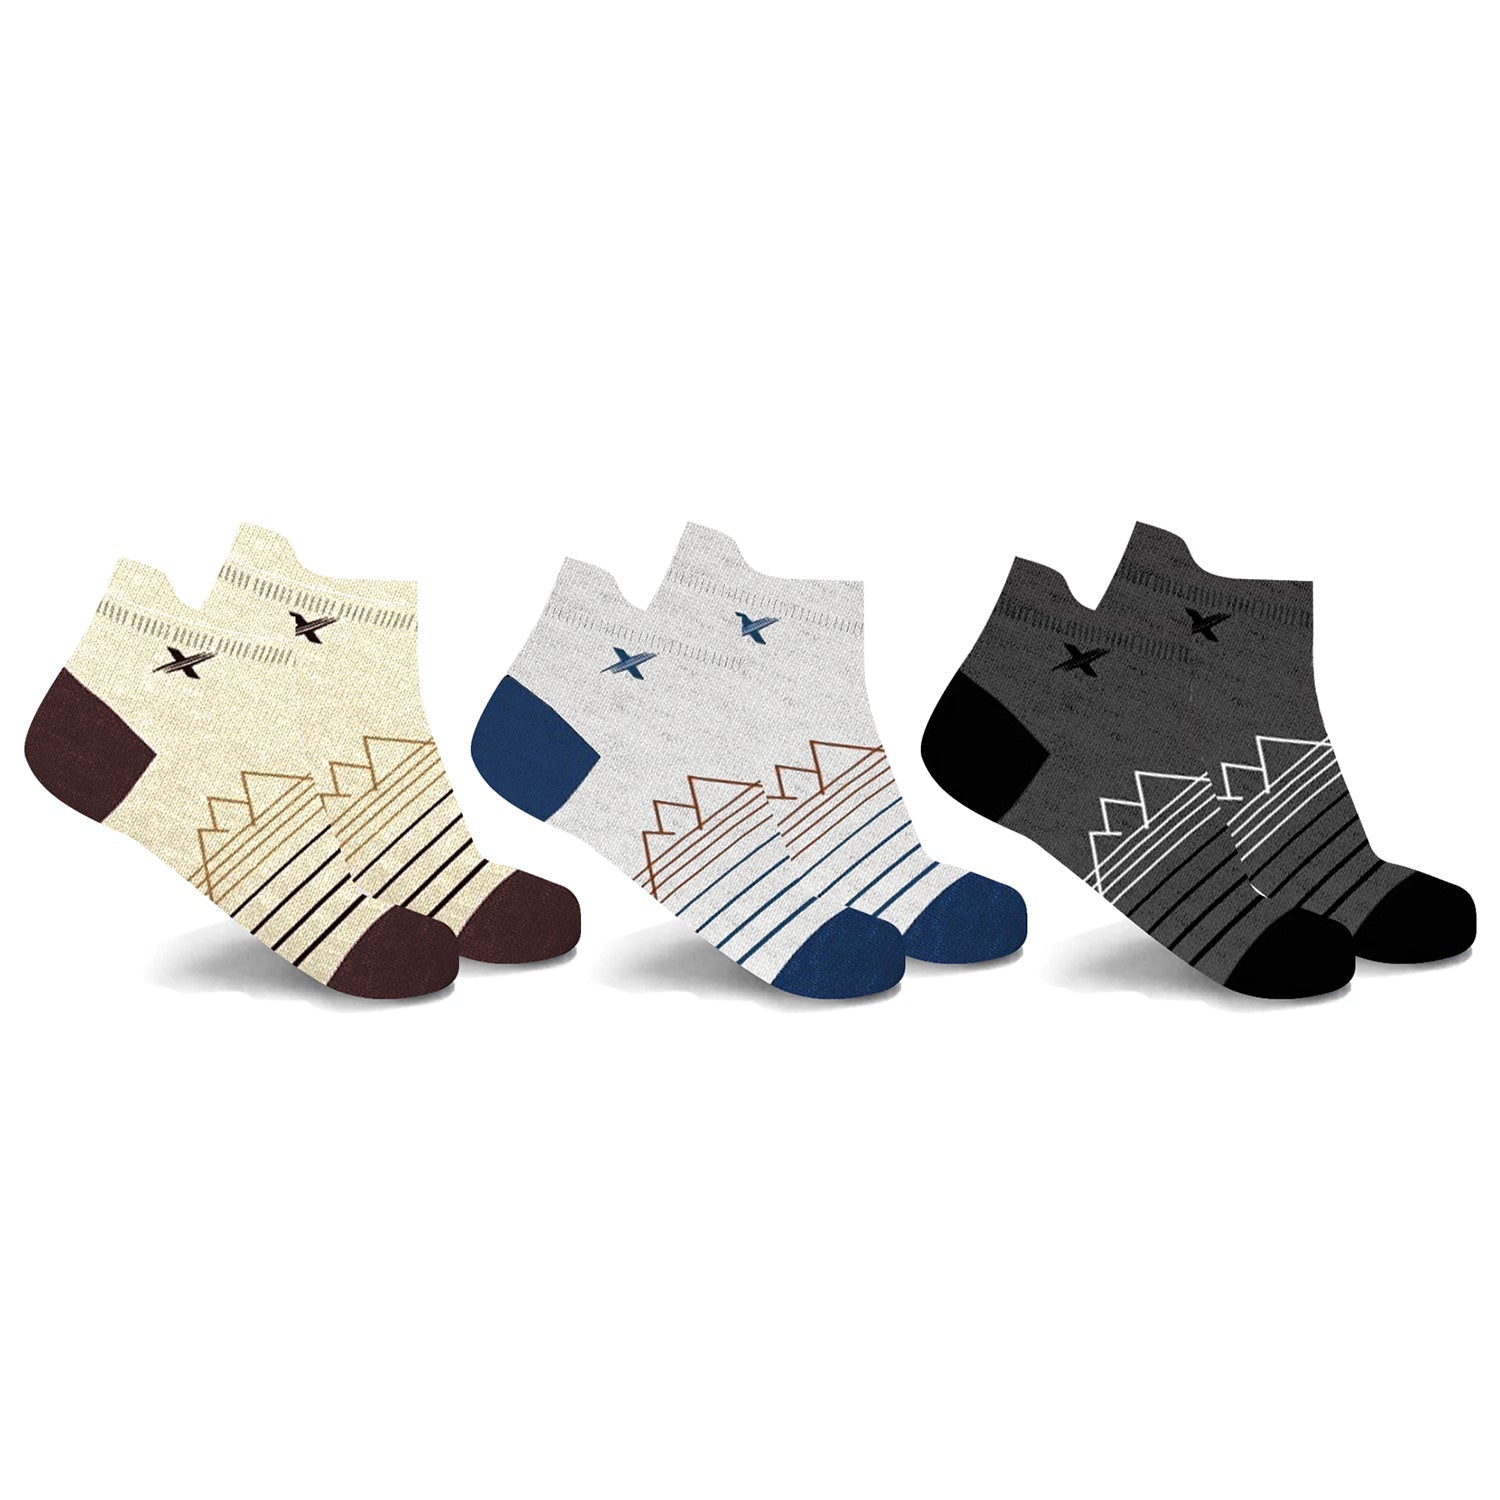 3-Pairs: Merino Wool Compression Ankle Socks Hiking Camping Standing